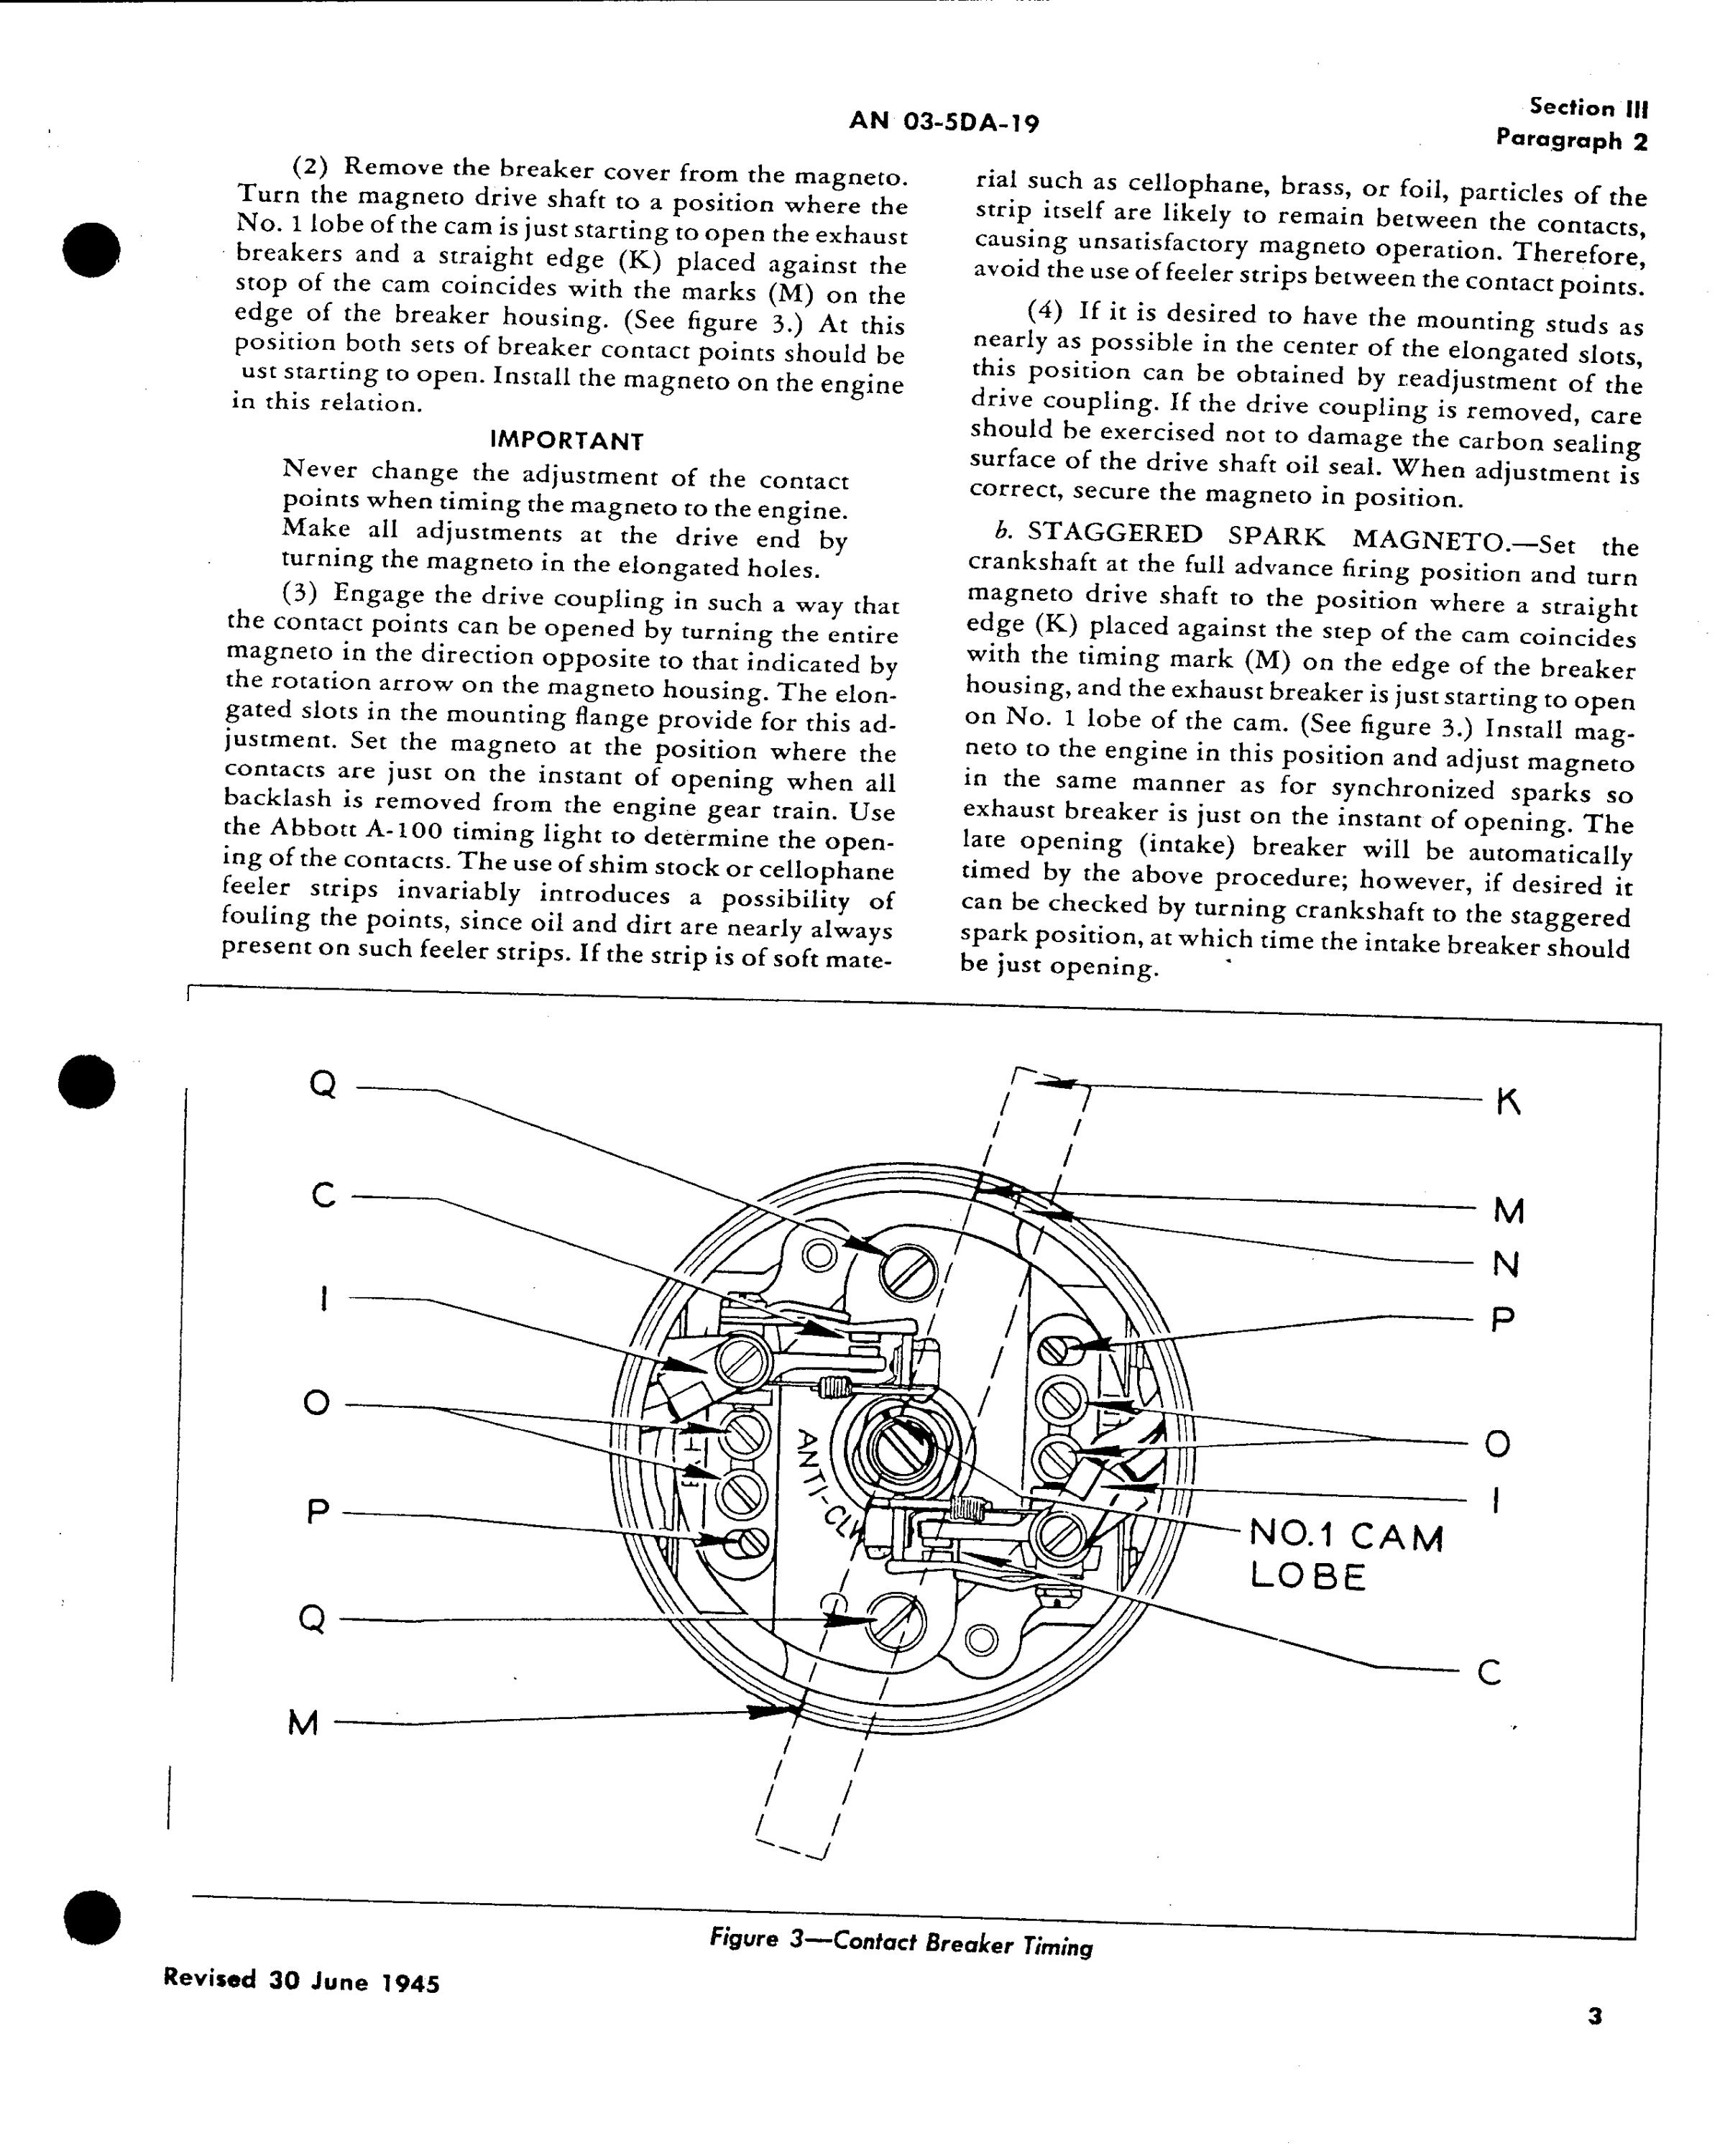 Sample page 7 from AirCorps Library document: Operation, Service, & Overhaul with Parts Catalog for Magneto Type DFLN-5